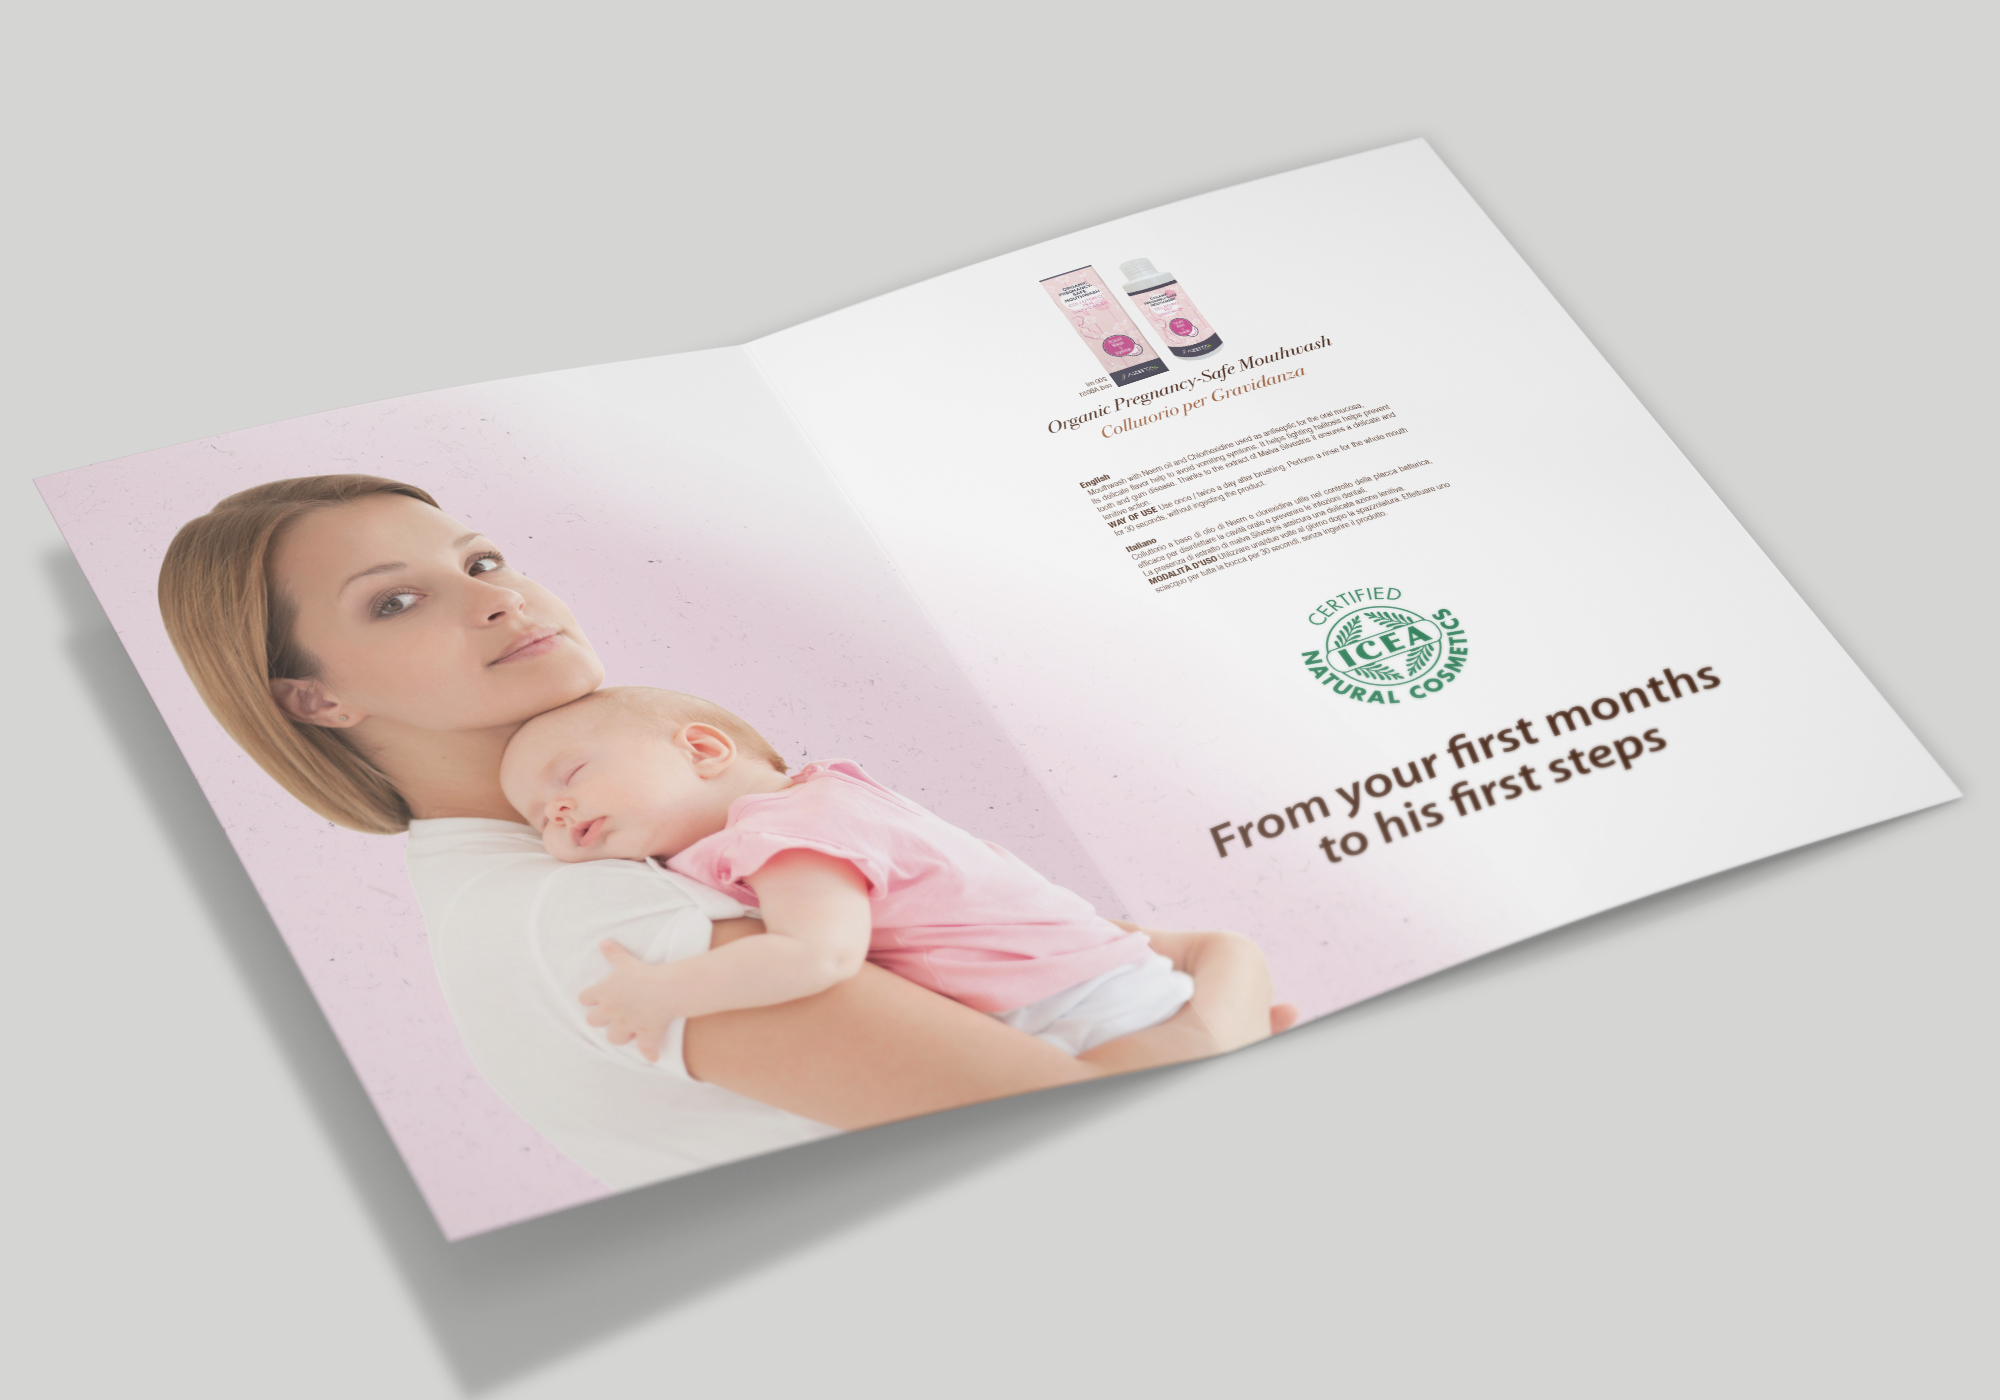 Brochure Azeta Bio for new mums and babies hygene products